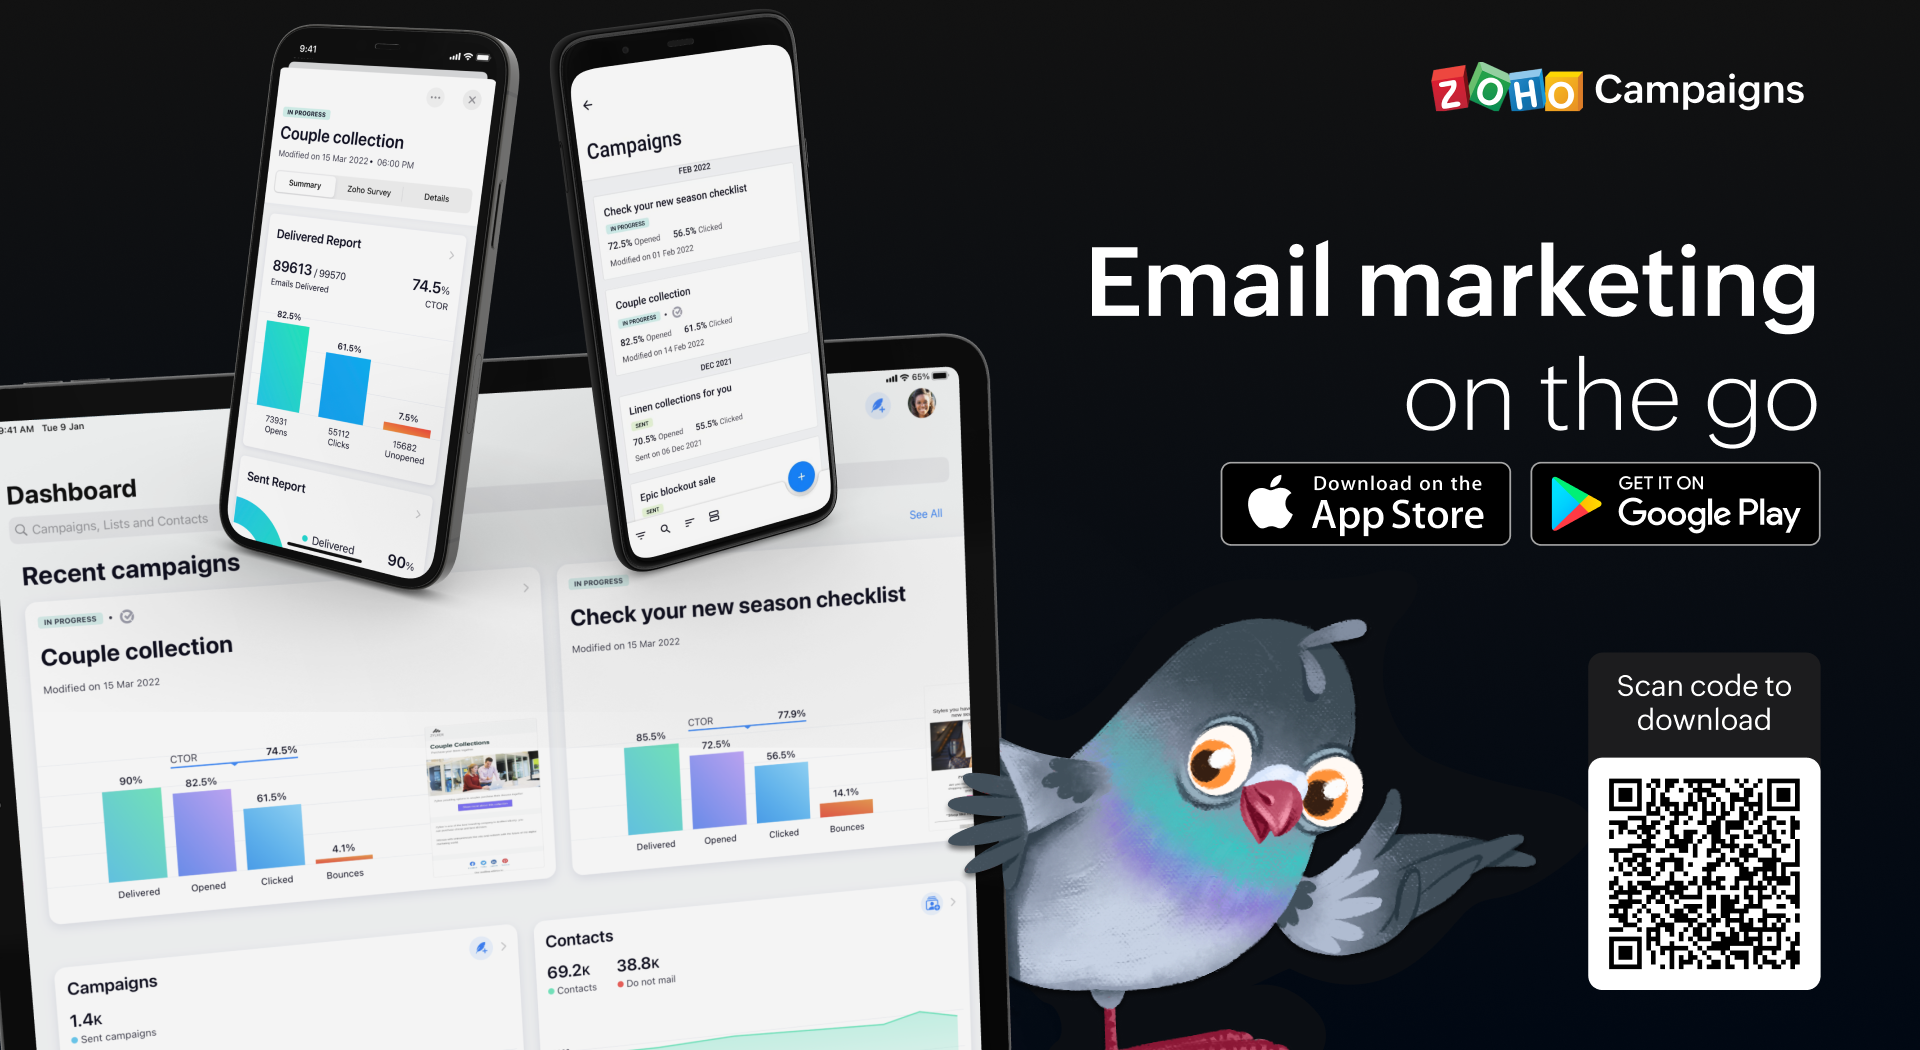 Work smarter with the completely redesigned Zoho Campaigns mobile app